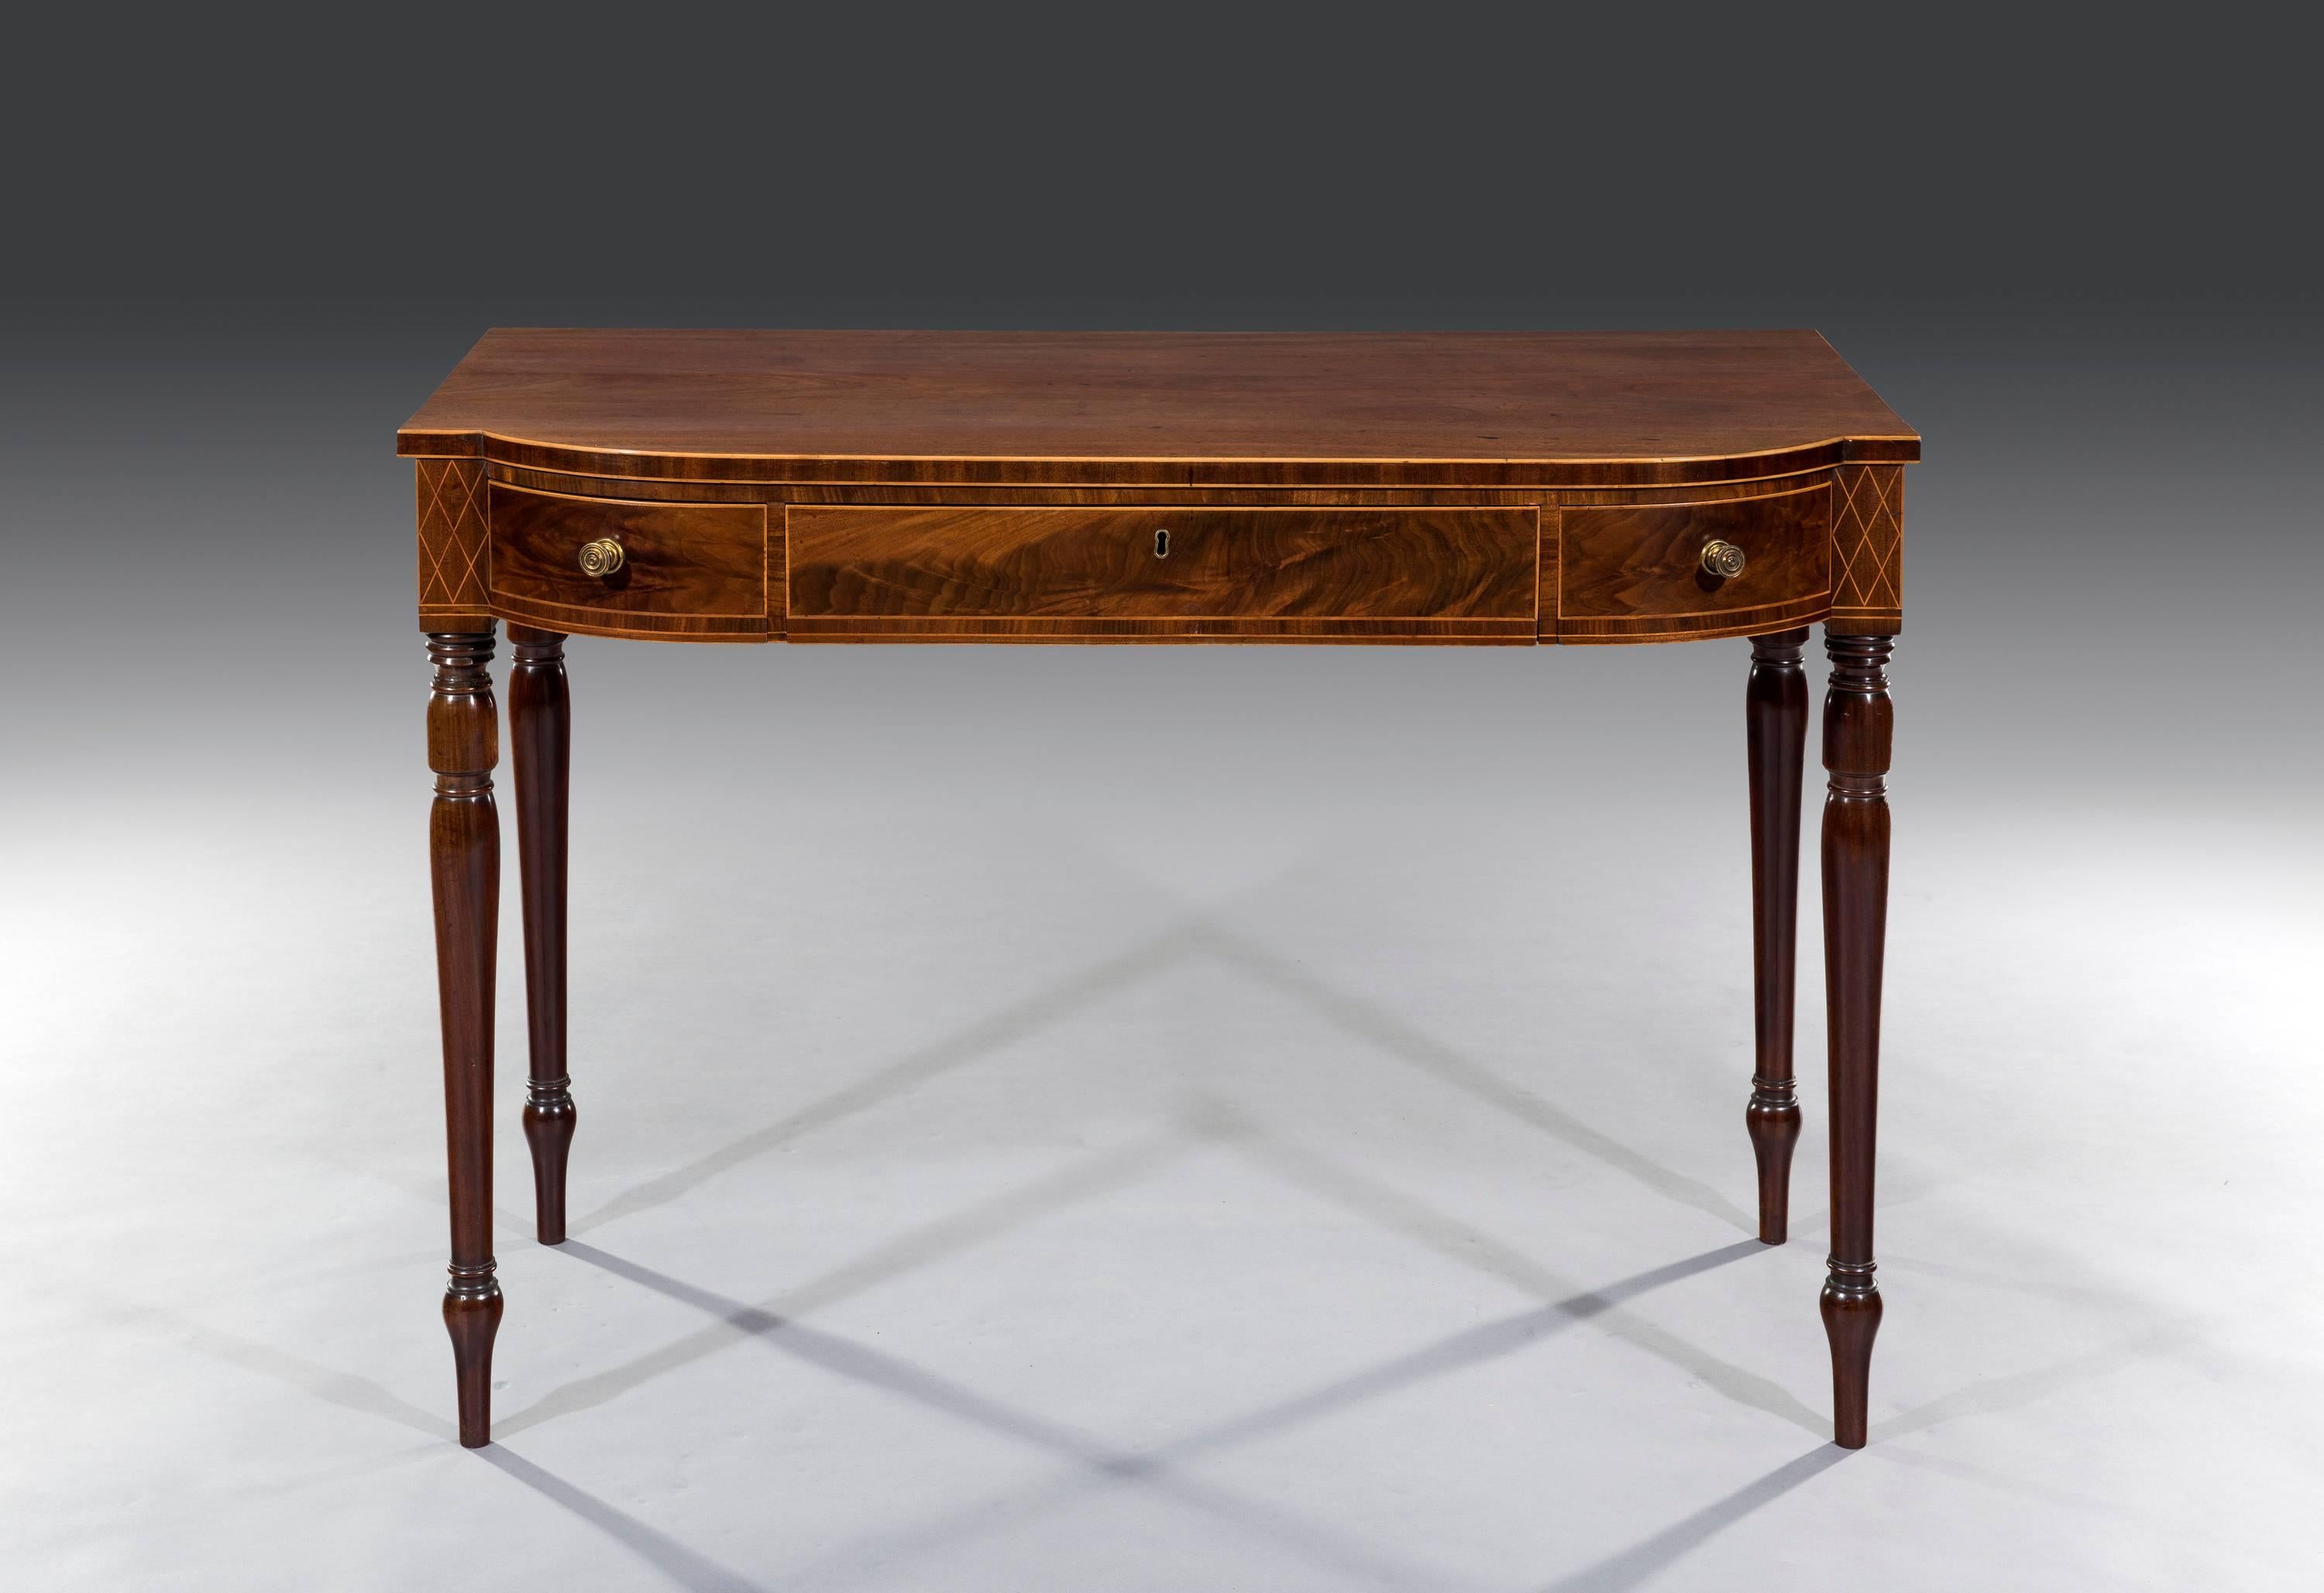 Late Georgian three-drawer bow fronted mahogany console serving table of Sheraton design with satinwood string inlay and turned legs.
Measures: 42